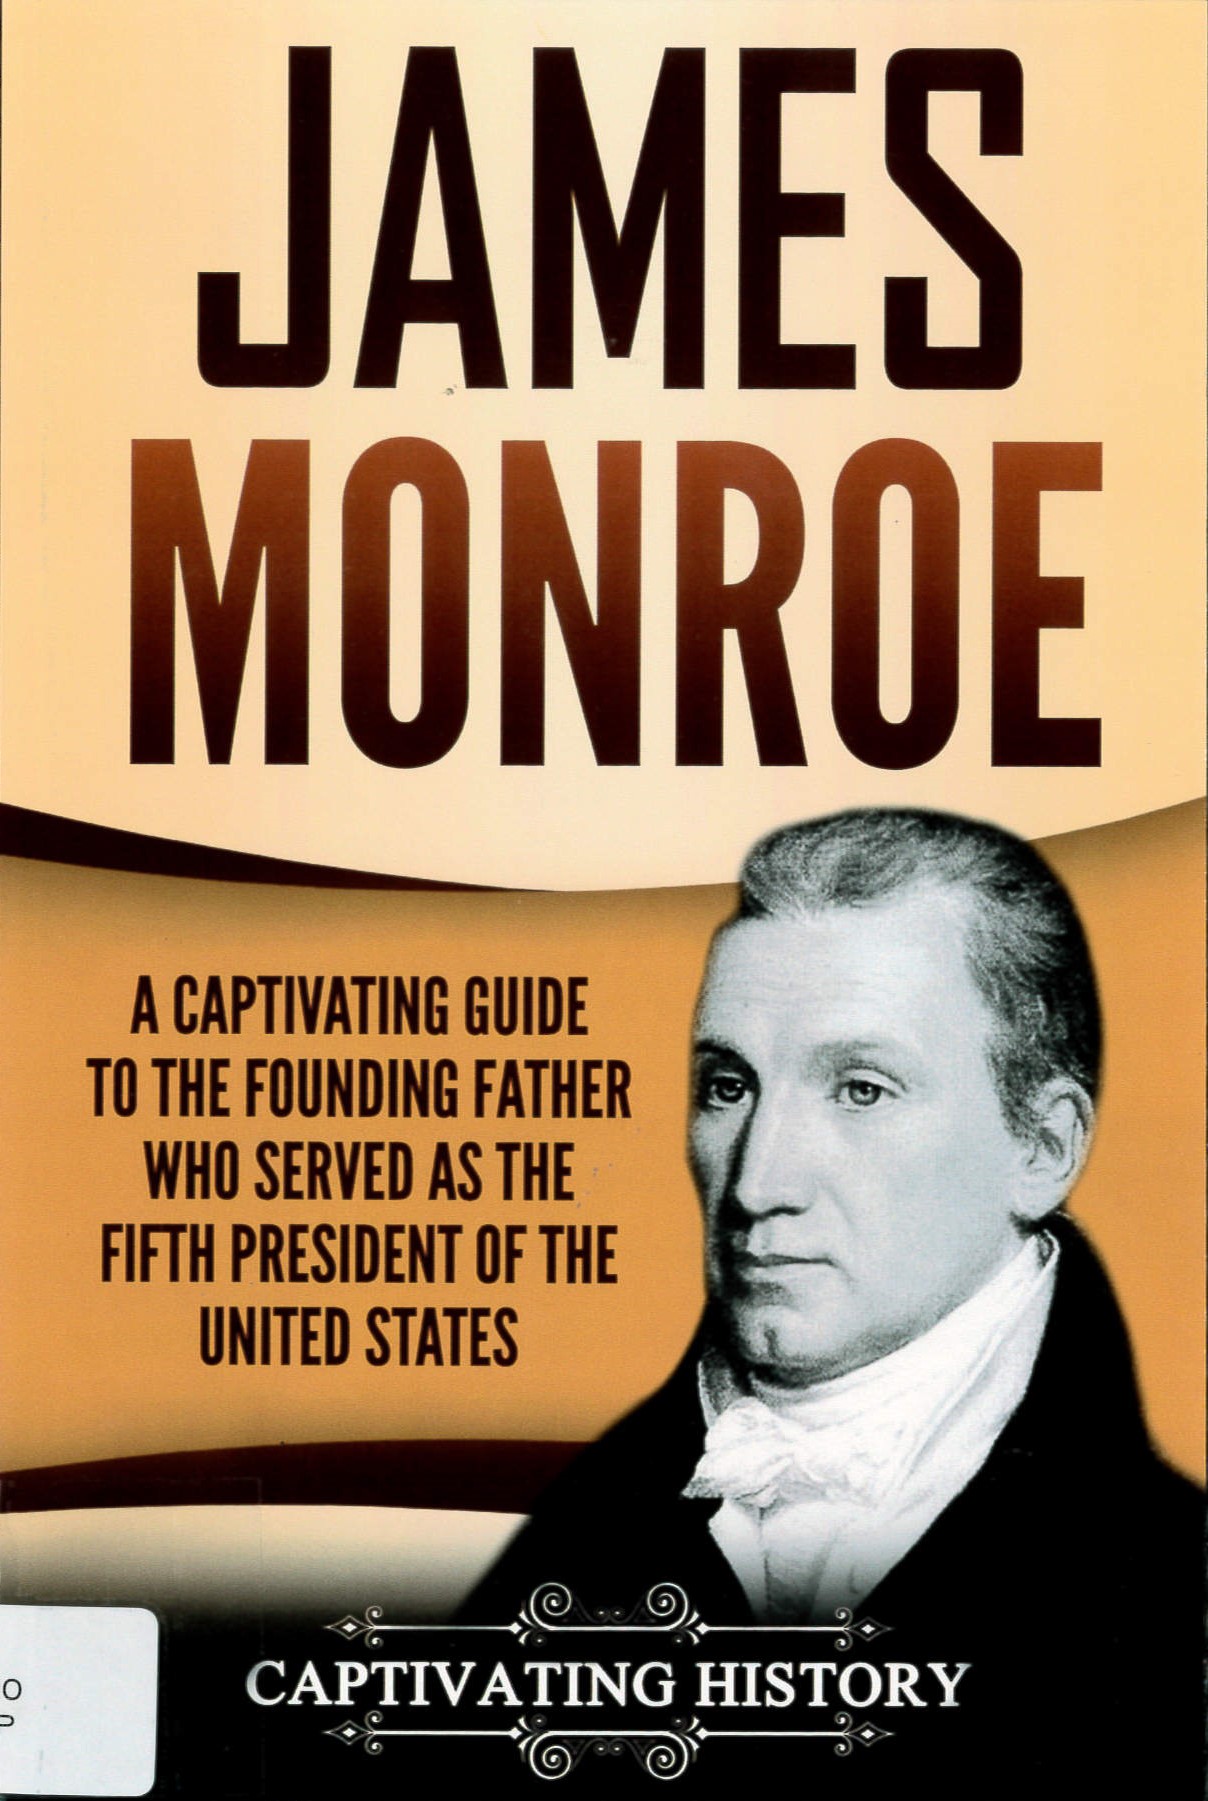 James Monroe : A Captivating Guide to the Founding Father Who Served as the Fifth President of the United States.